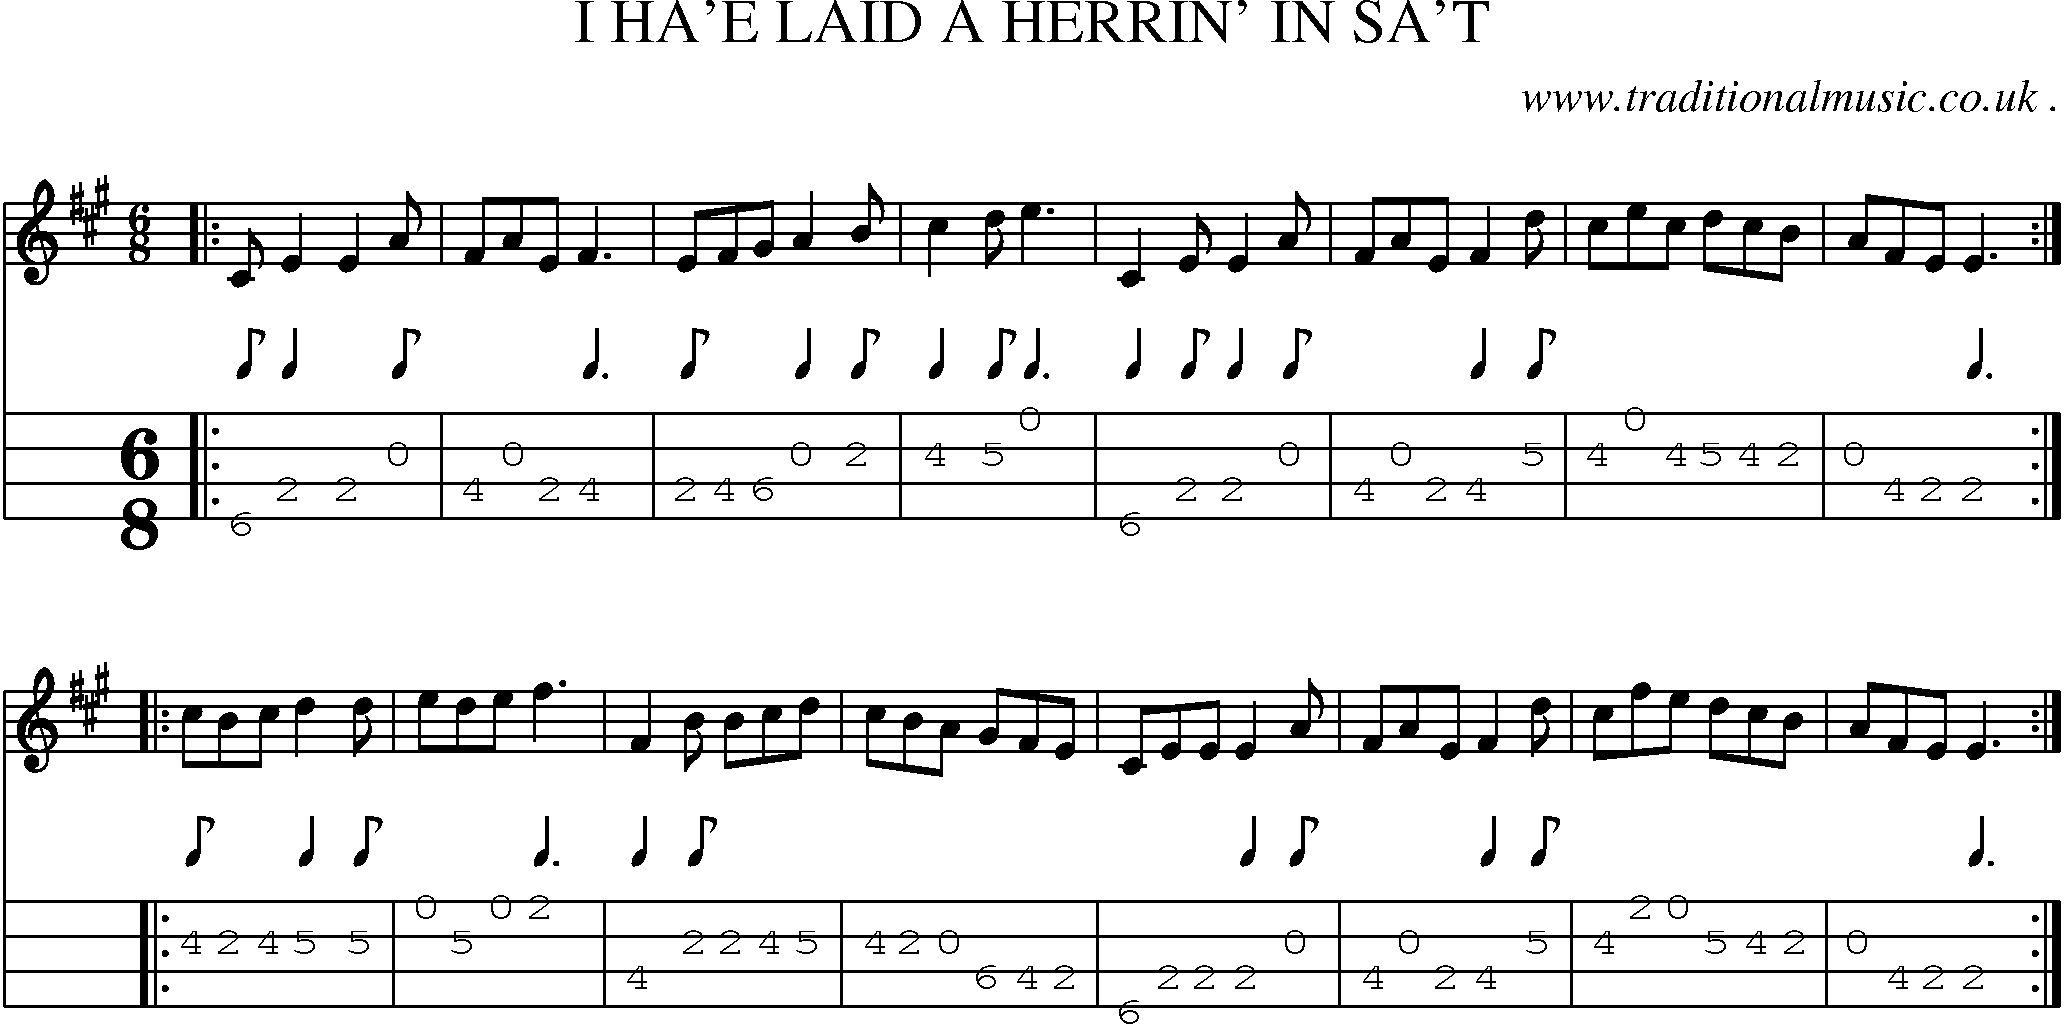 Sheet-music  score, Chords and Mandolin Tabs for I Hae Laid A Herrin In Sat